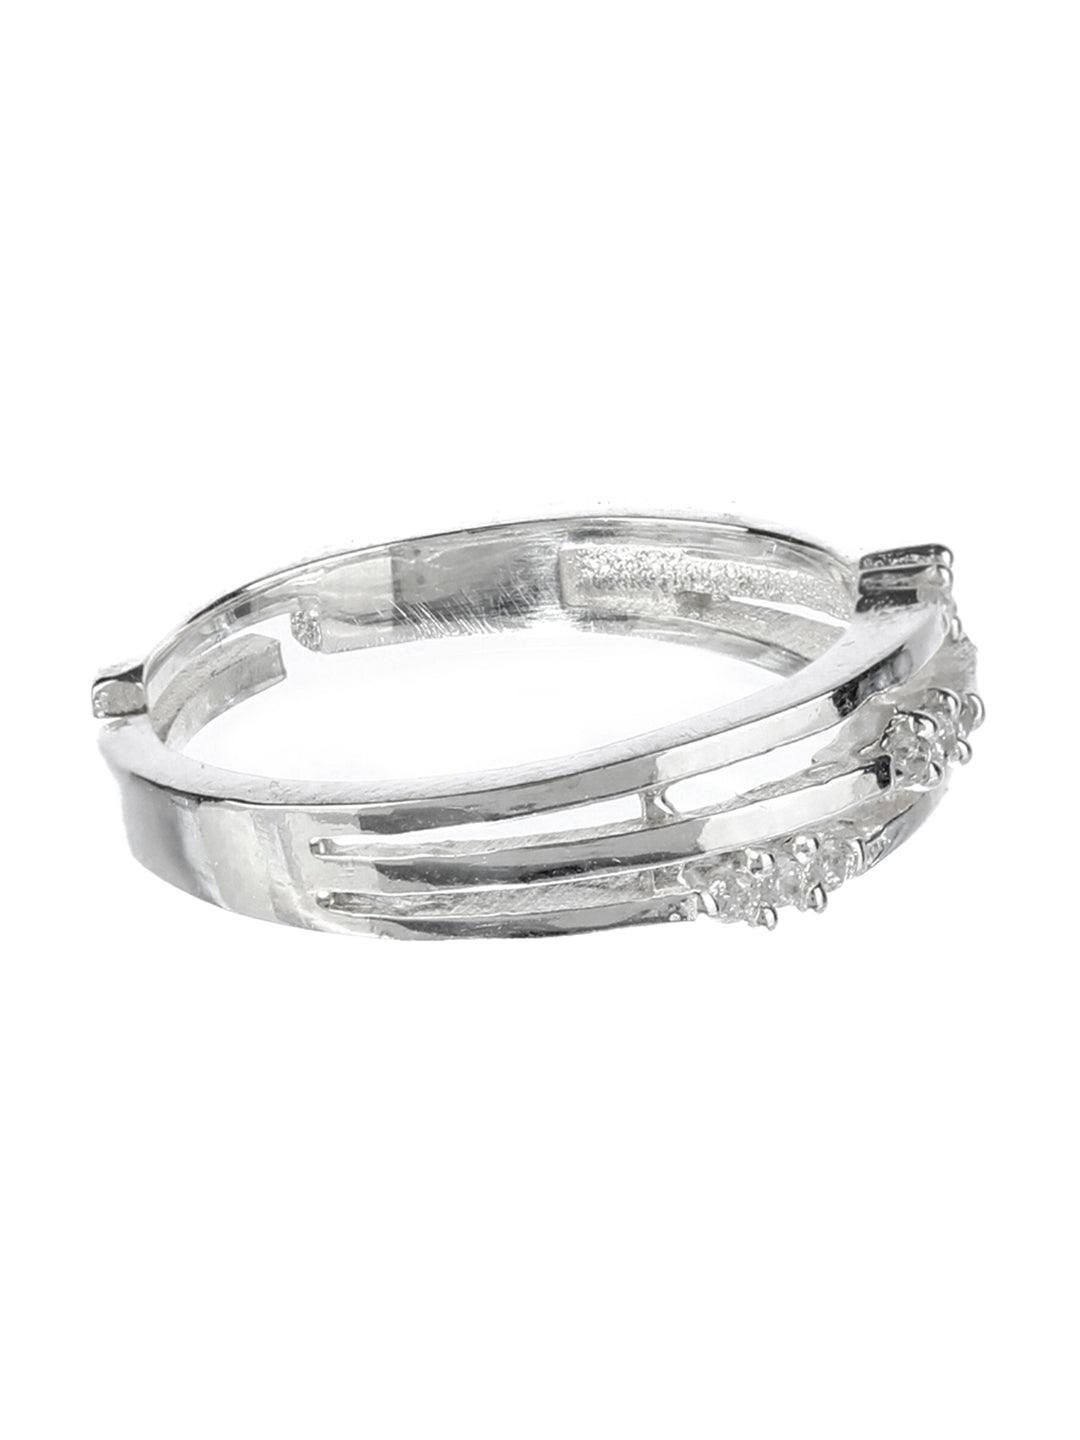 Women's Wrapped Around You Sterling Silver Ring - Priyaasi - Indiakreations